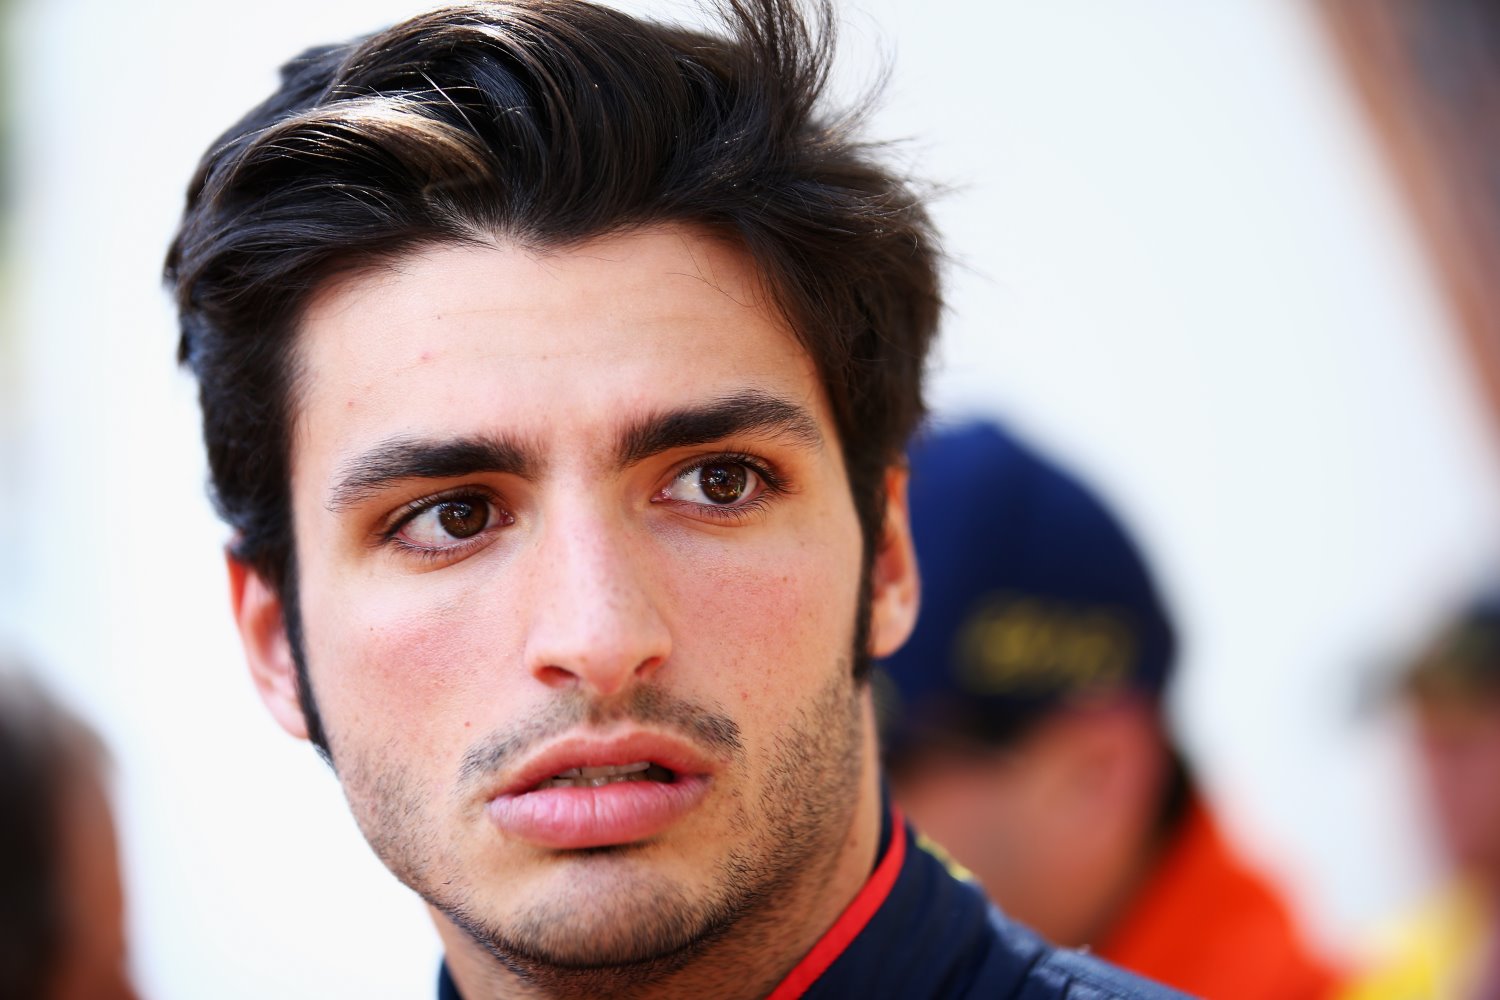 Team says Sainz just as fast as Verstappen. In fact Sainz out-qualified Verstappen for the season